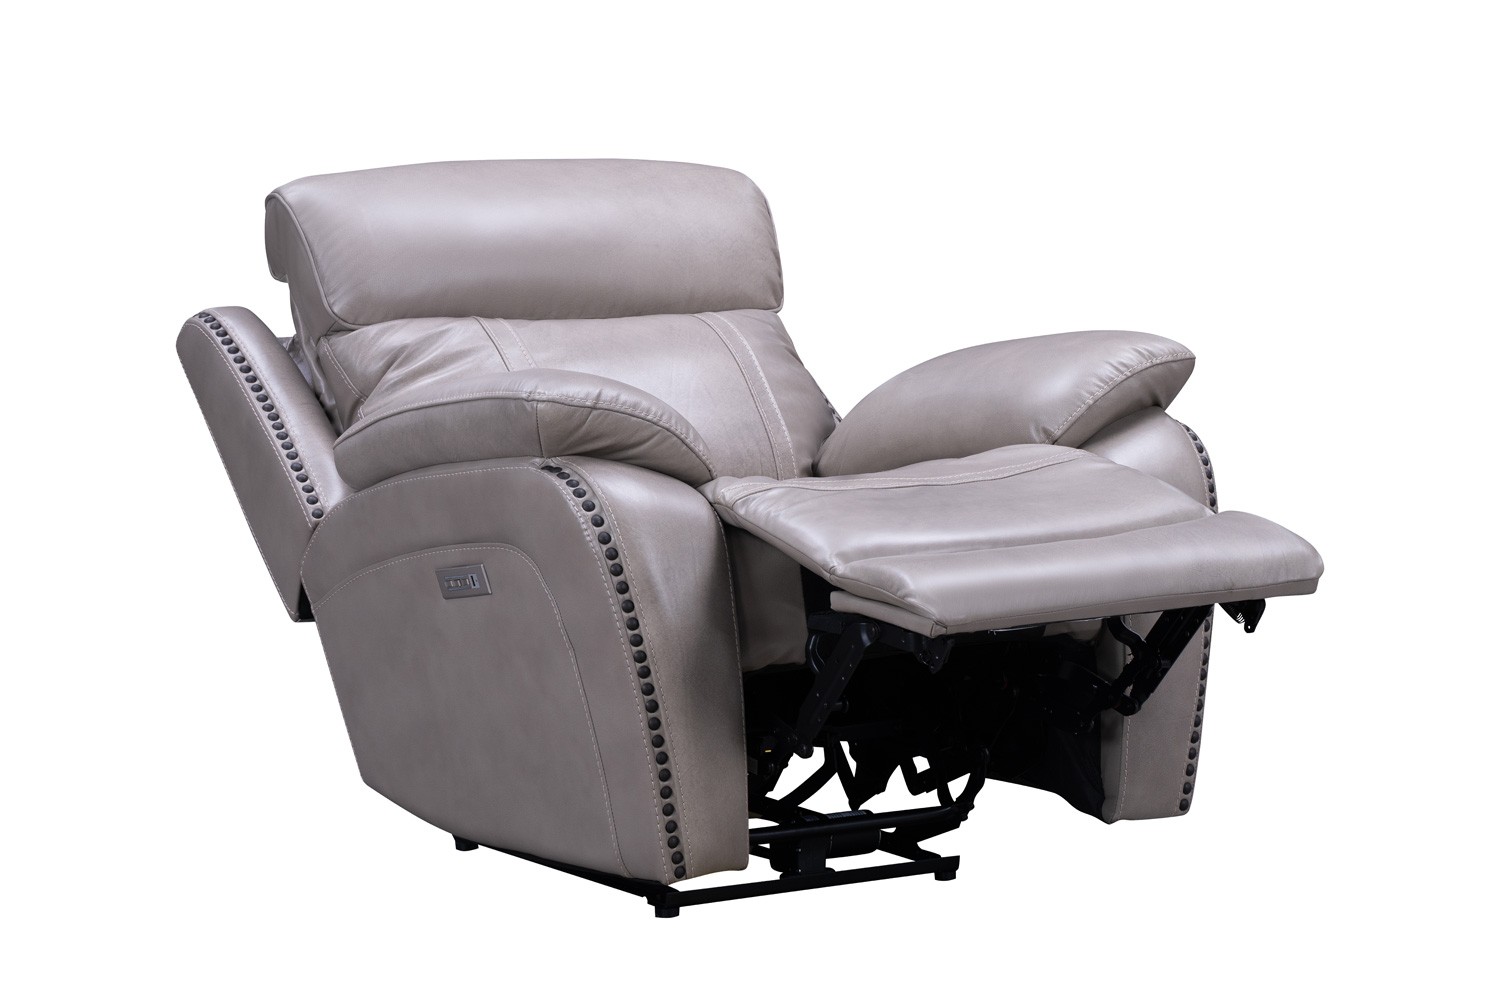 Barcalounger Sandover Power Recliner Chair with Power Head Rest and Lumbar - Sergi Gray Beige/Leather Match